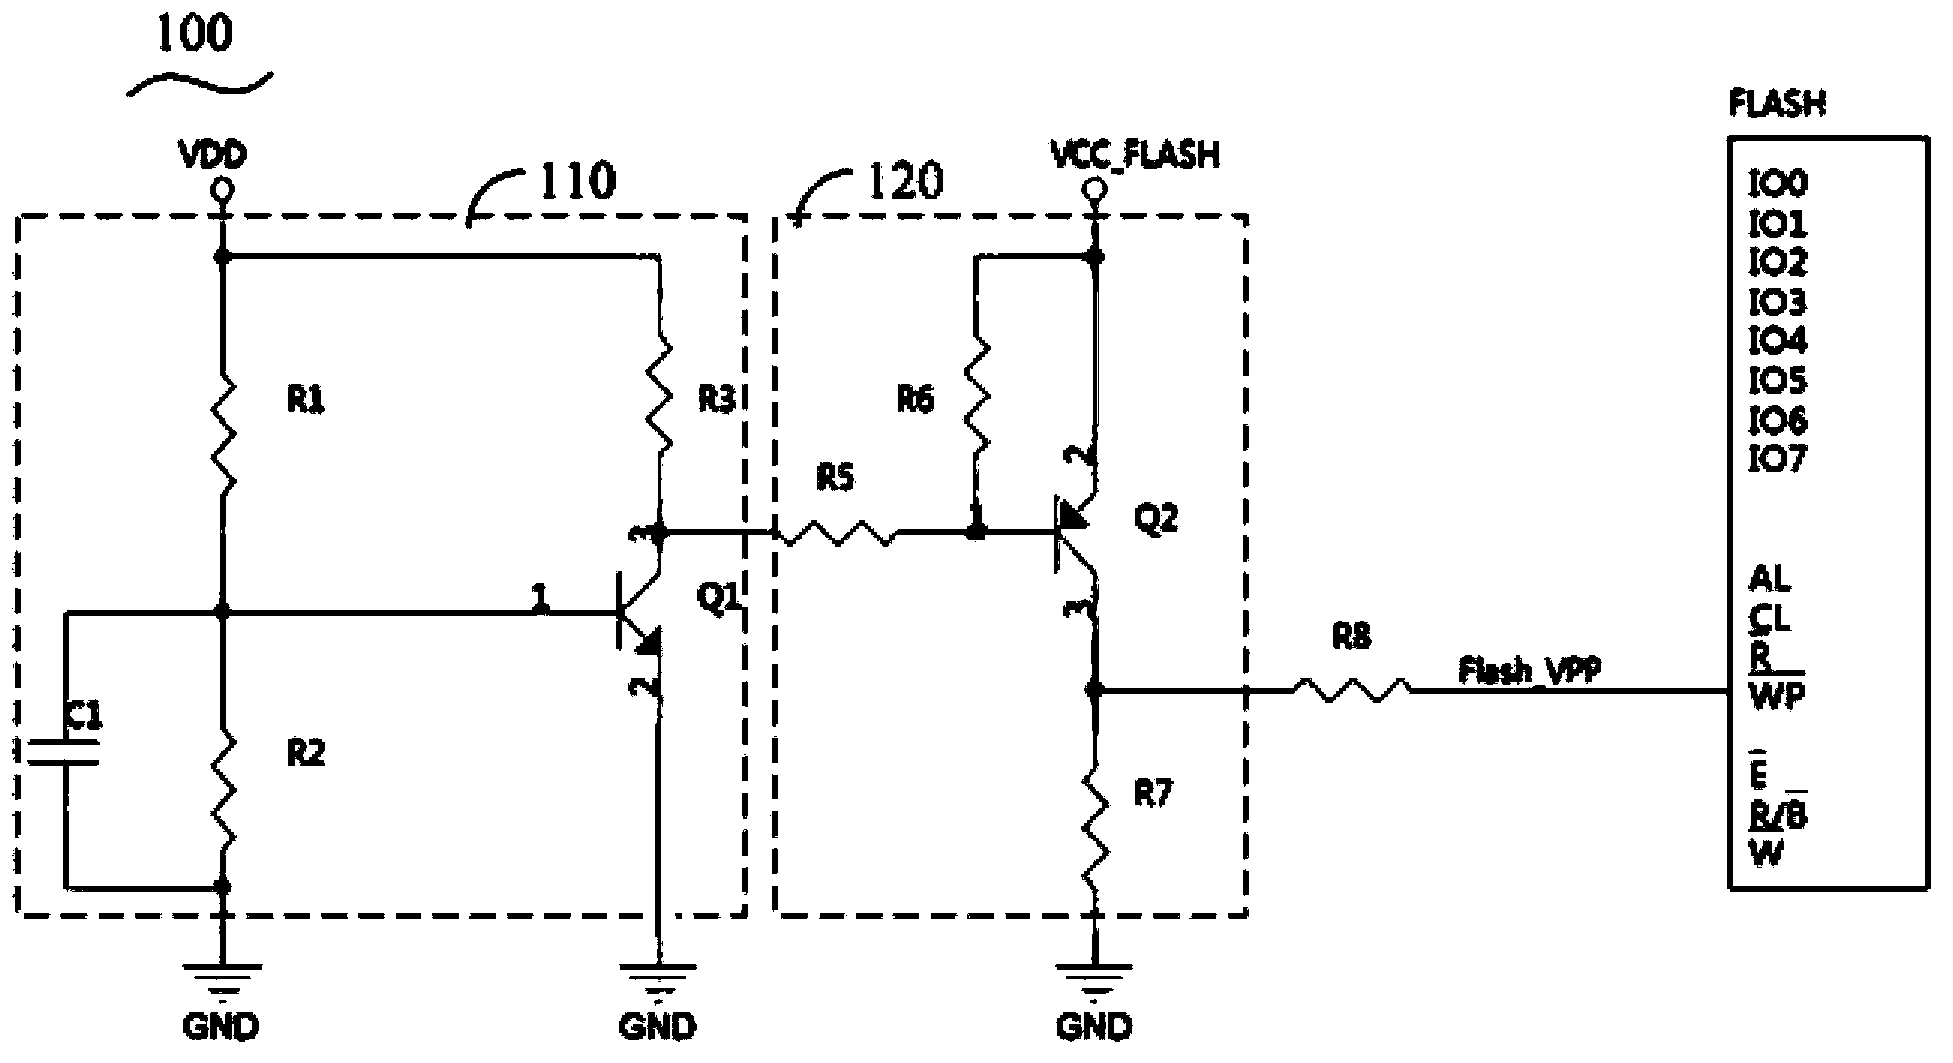 Power-fail protective circuit and power-fail protective sequential circuit for flash memory